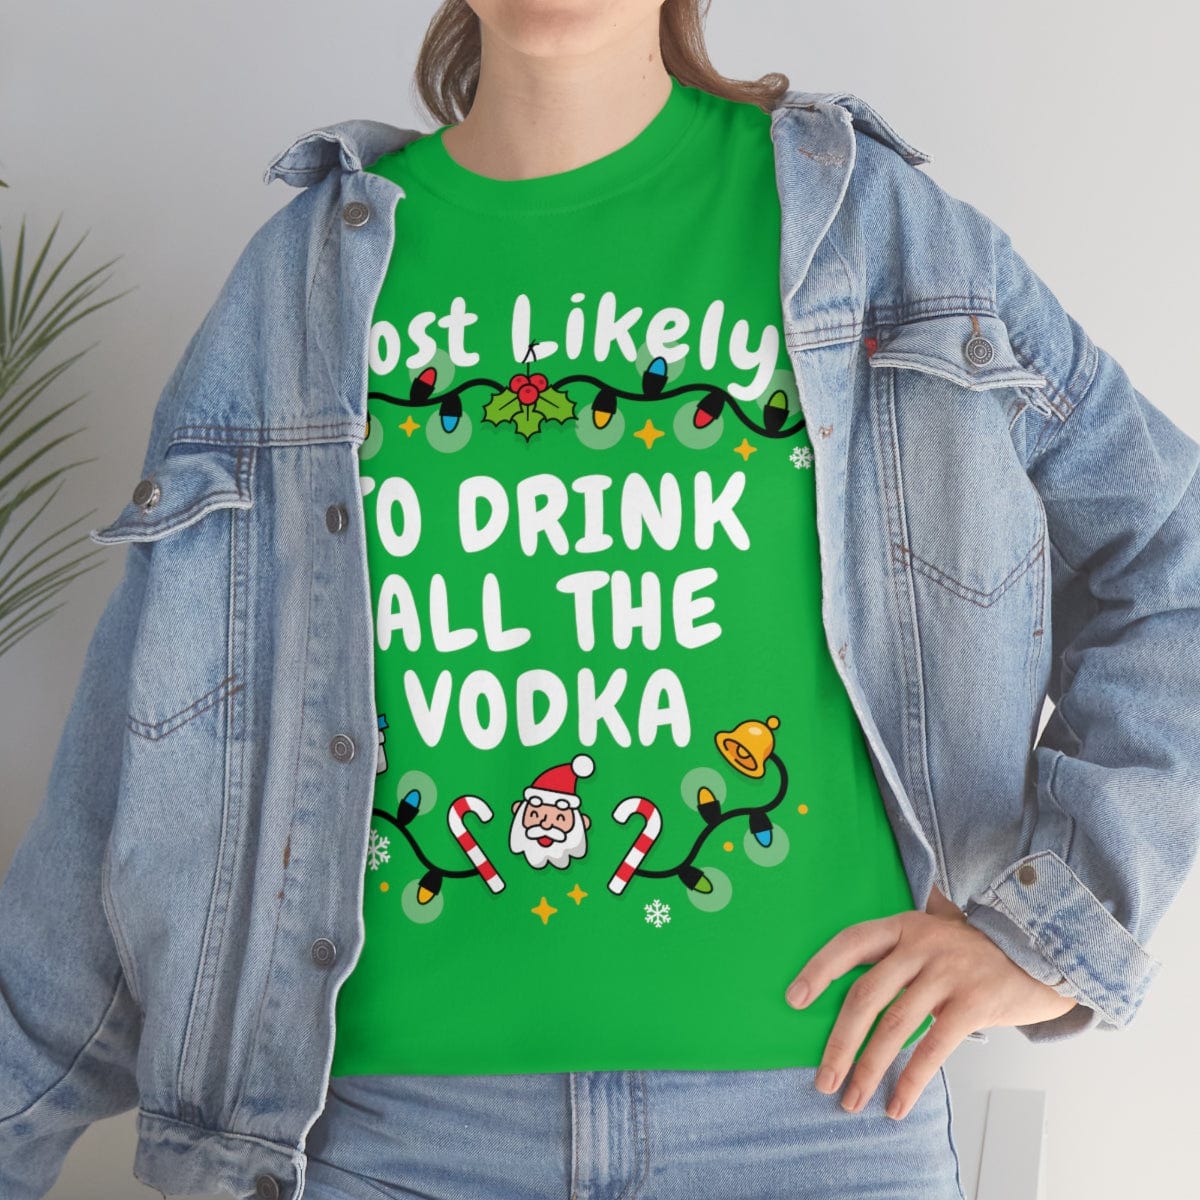 TO DRINK ALL THE VODKA